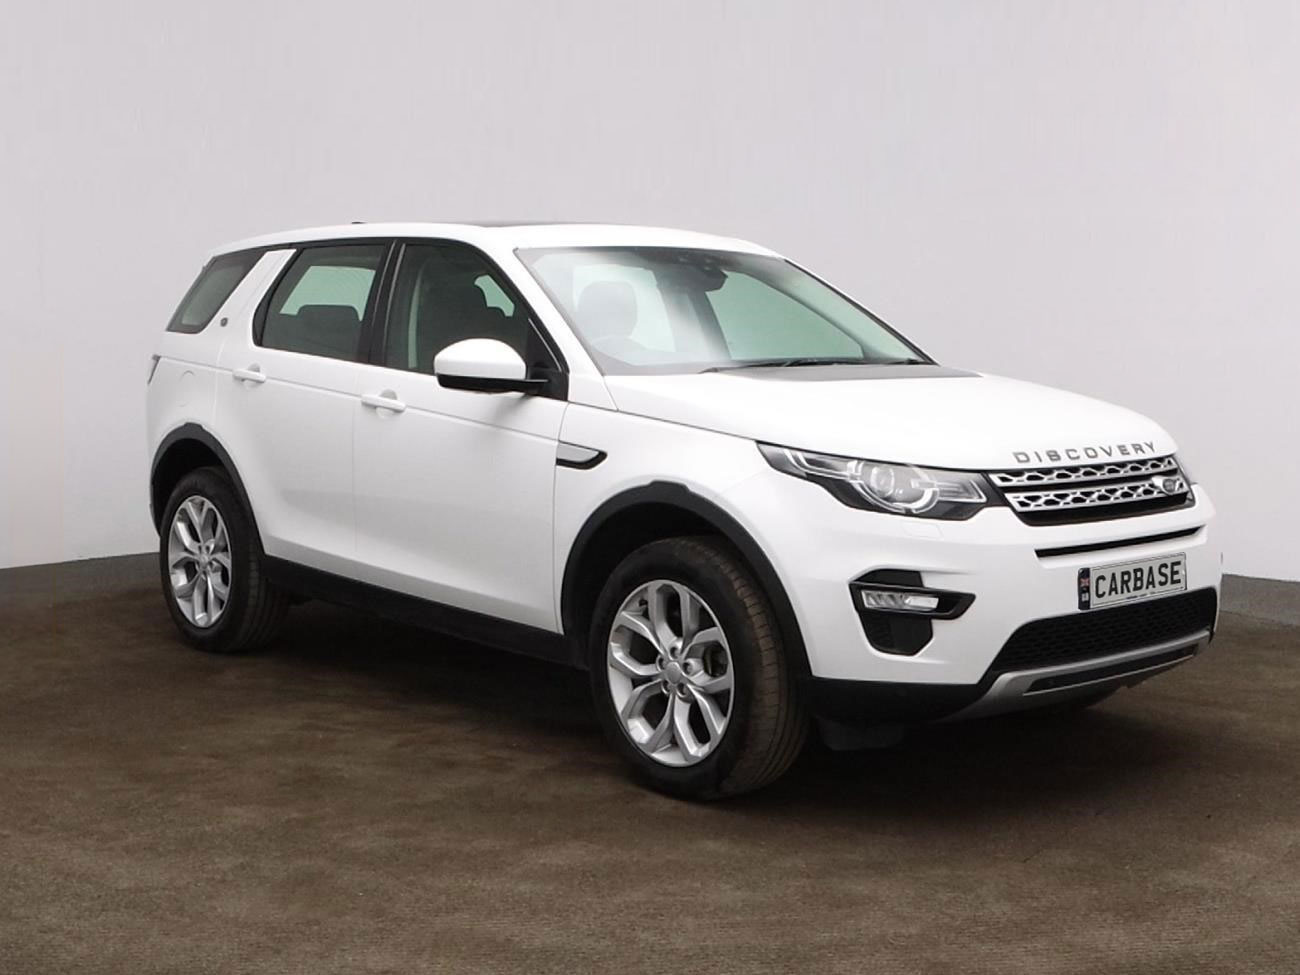 Side view of Land Rover Discovery Sport in showroom